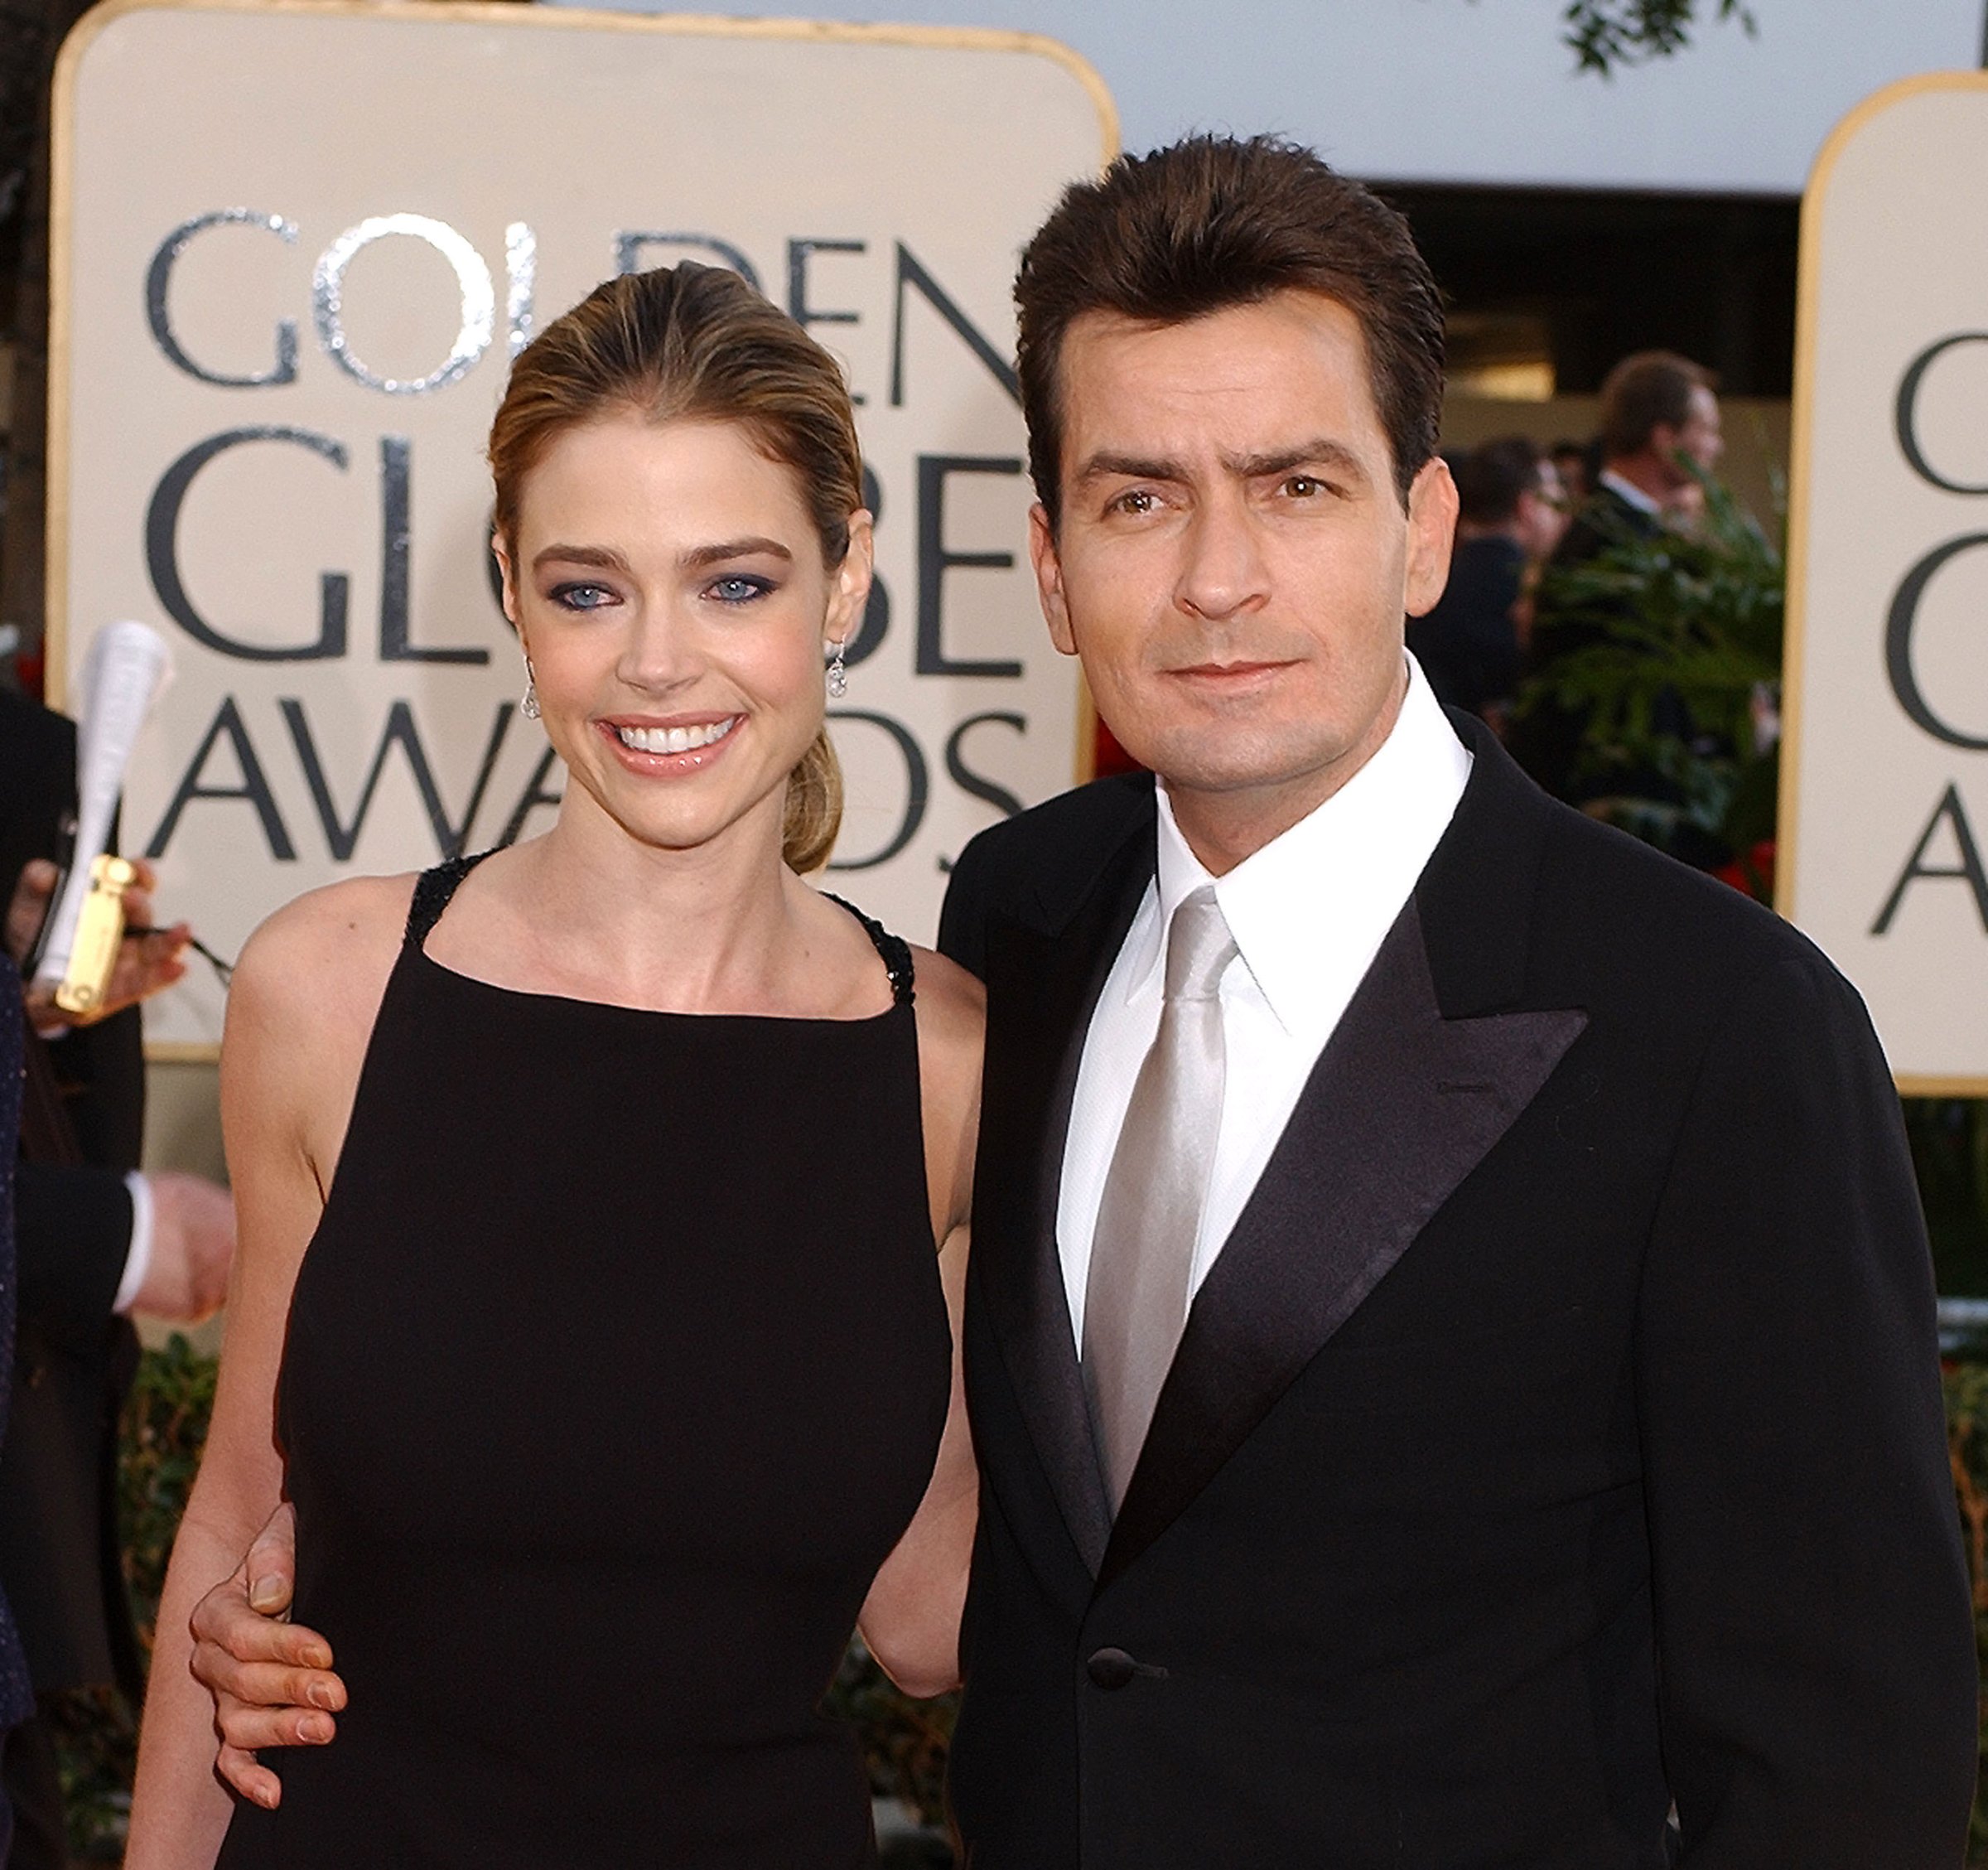 The 59th Annual Golden Globe Awards - Arrivals